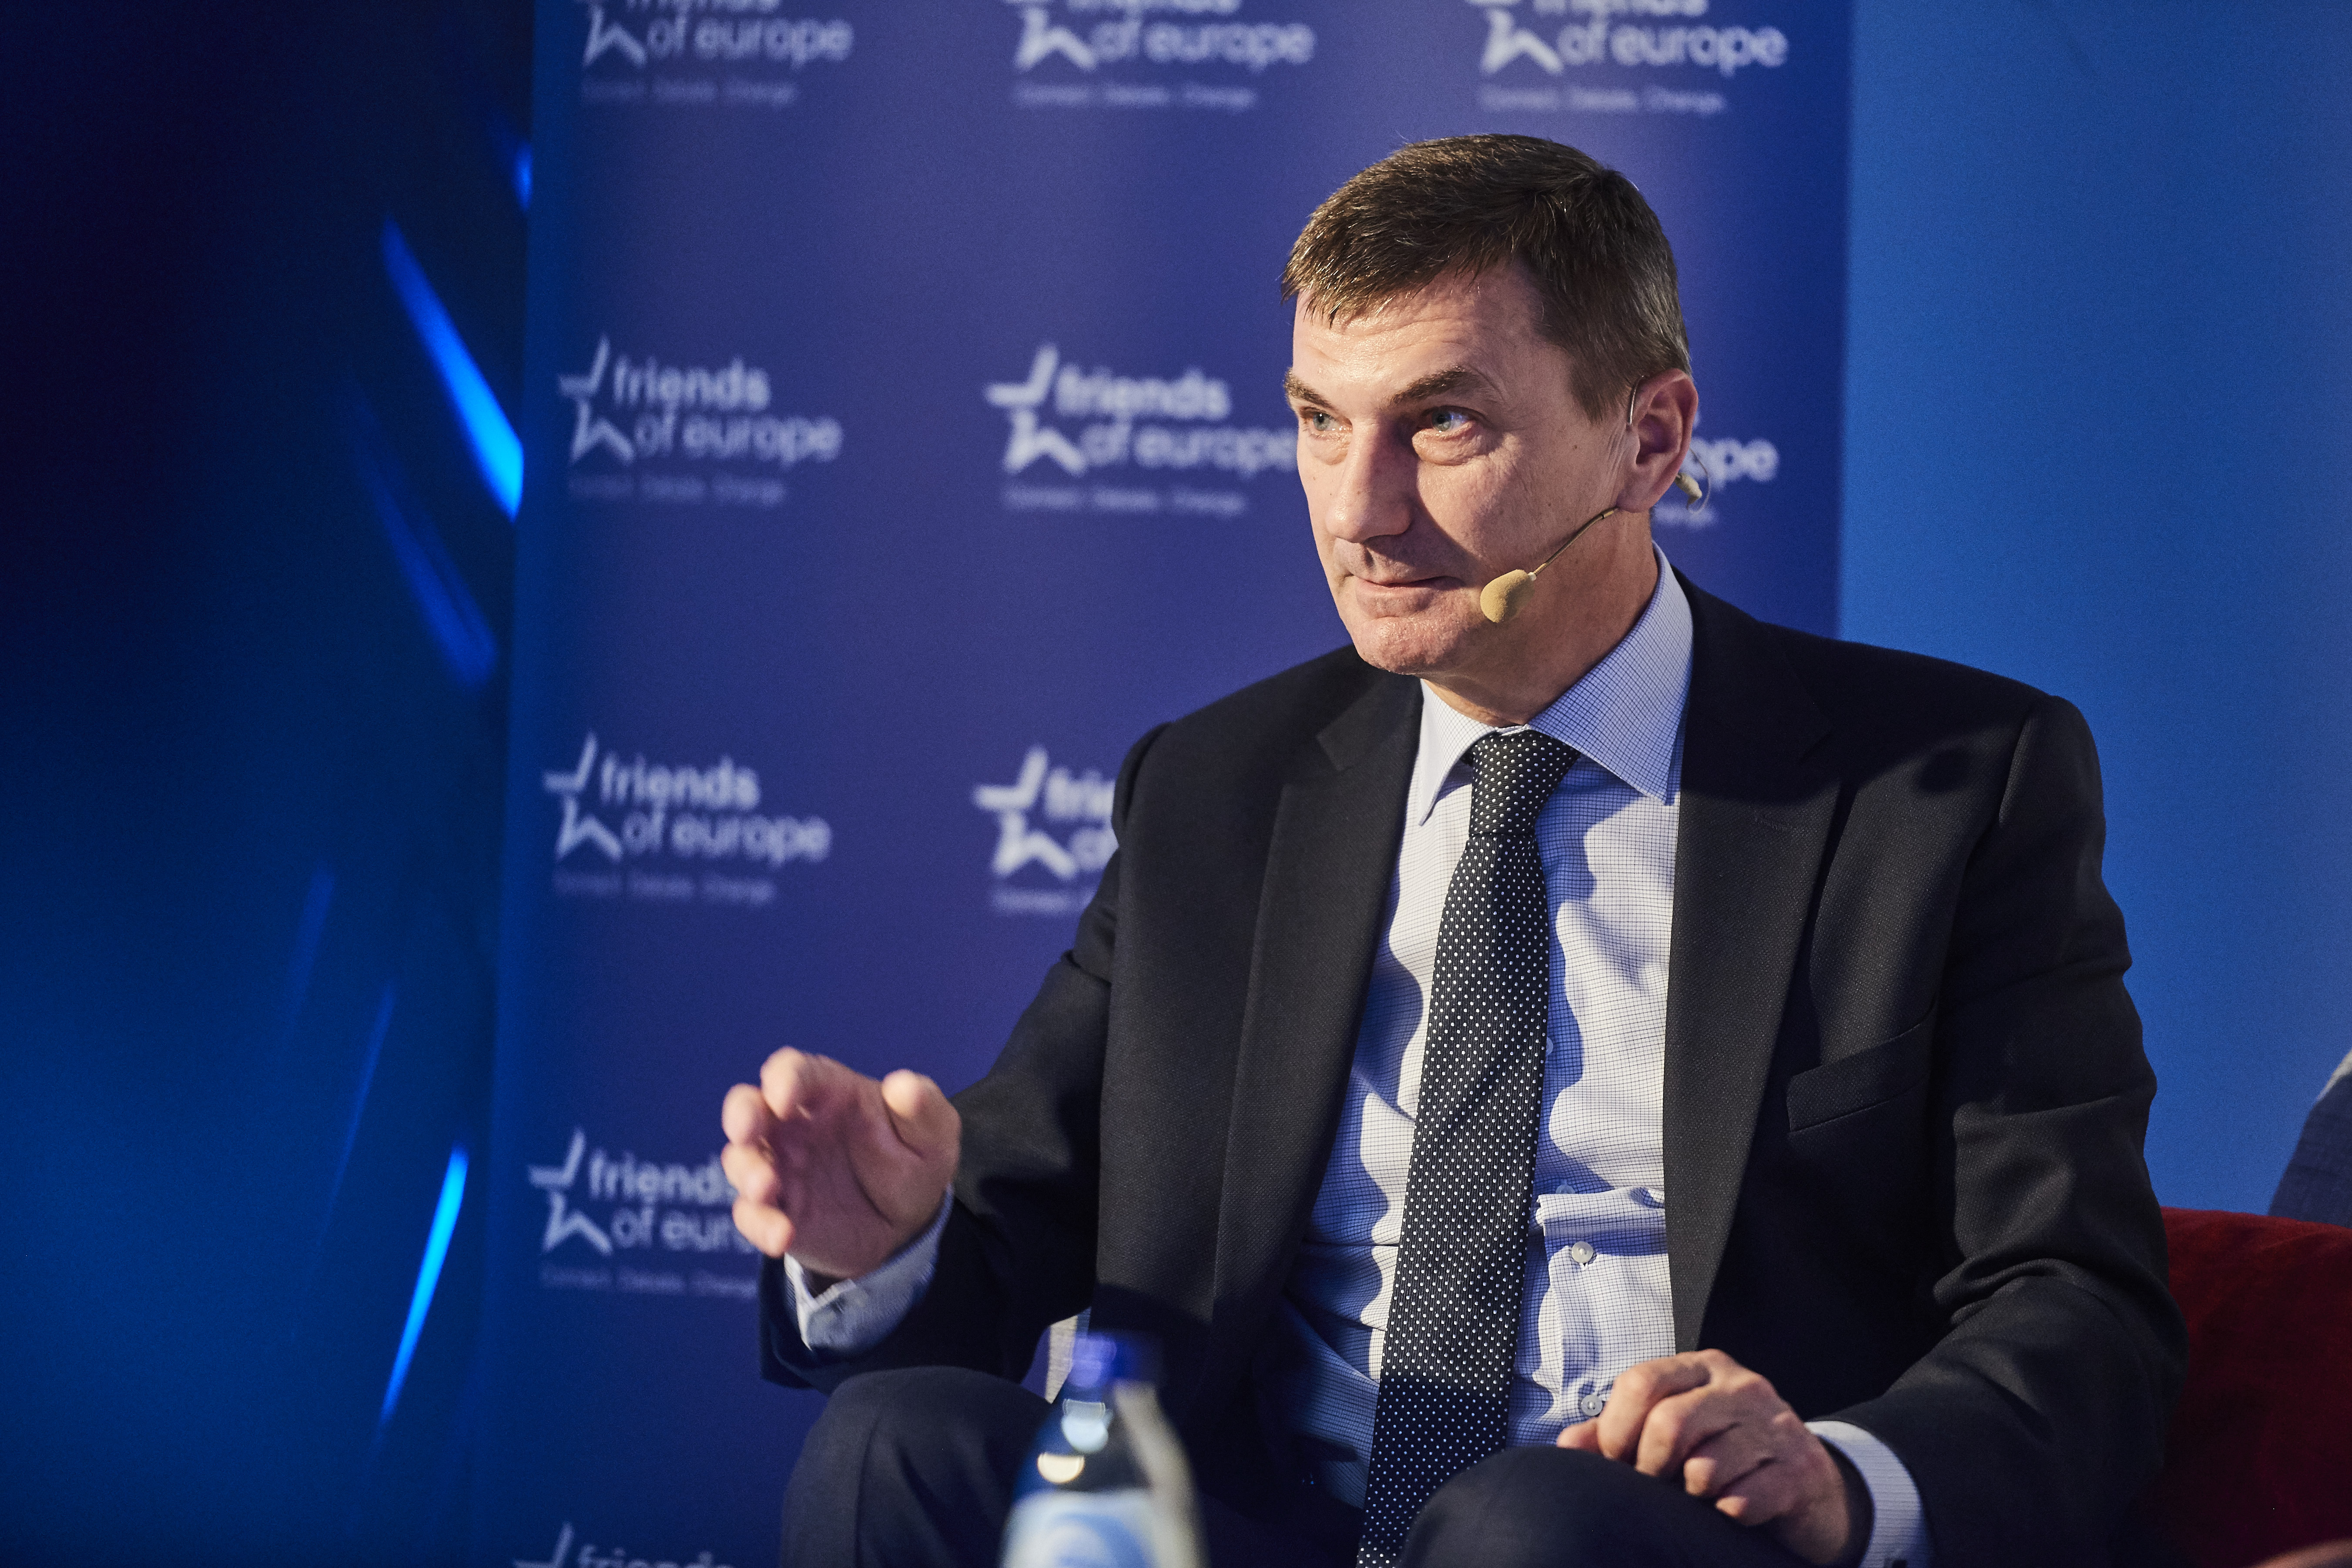 Conversation on Europe’s Digital Single Market with Andrus Ansip